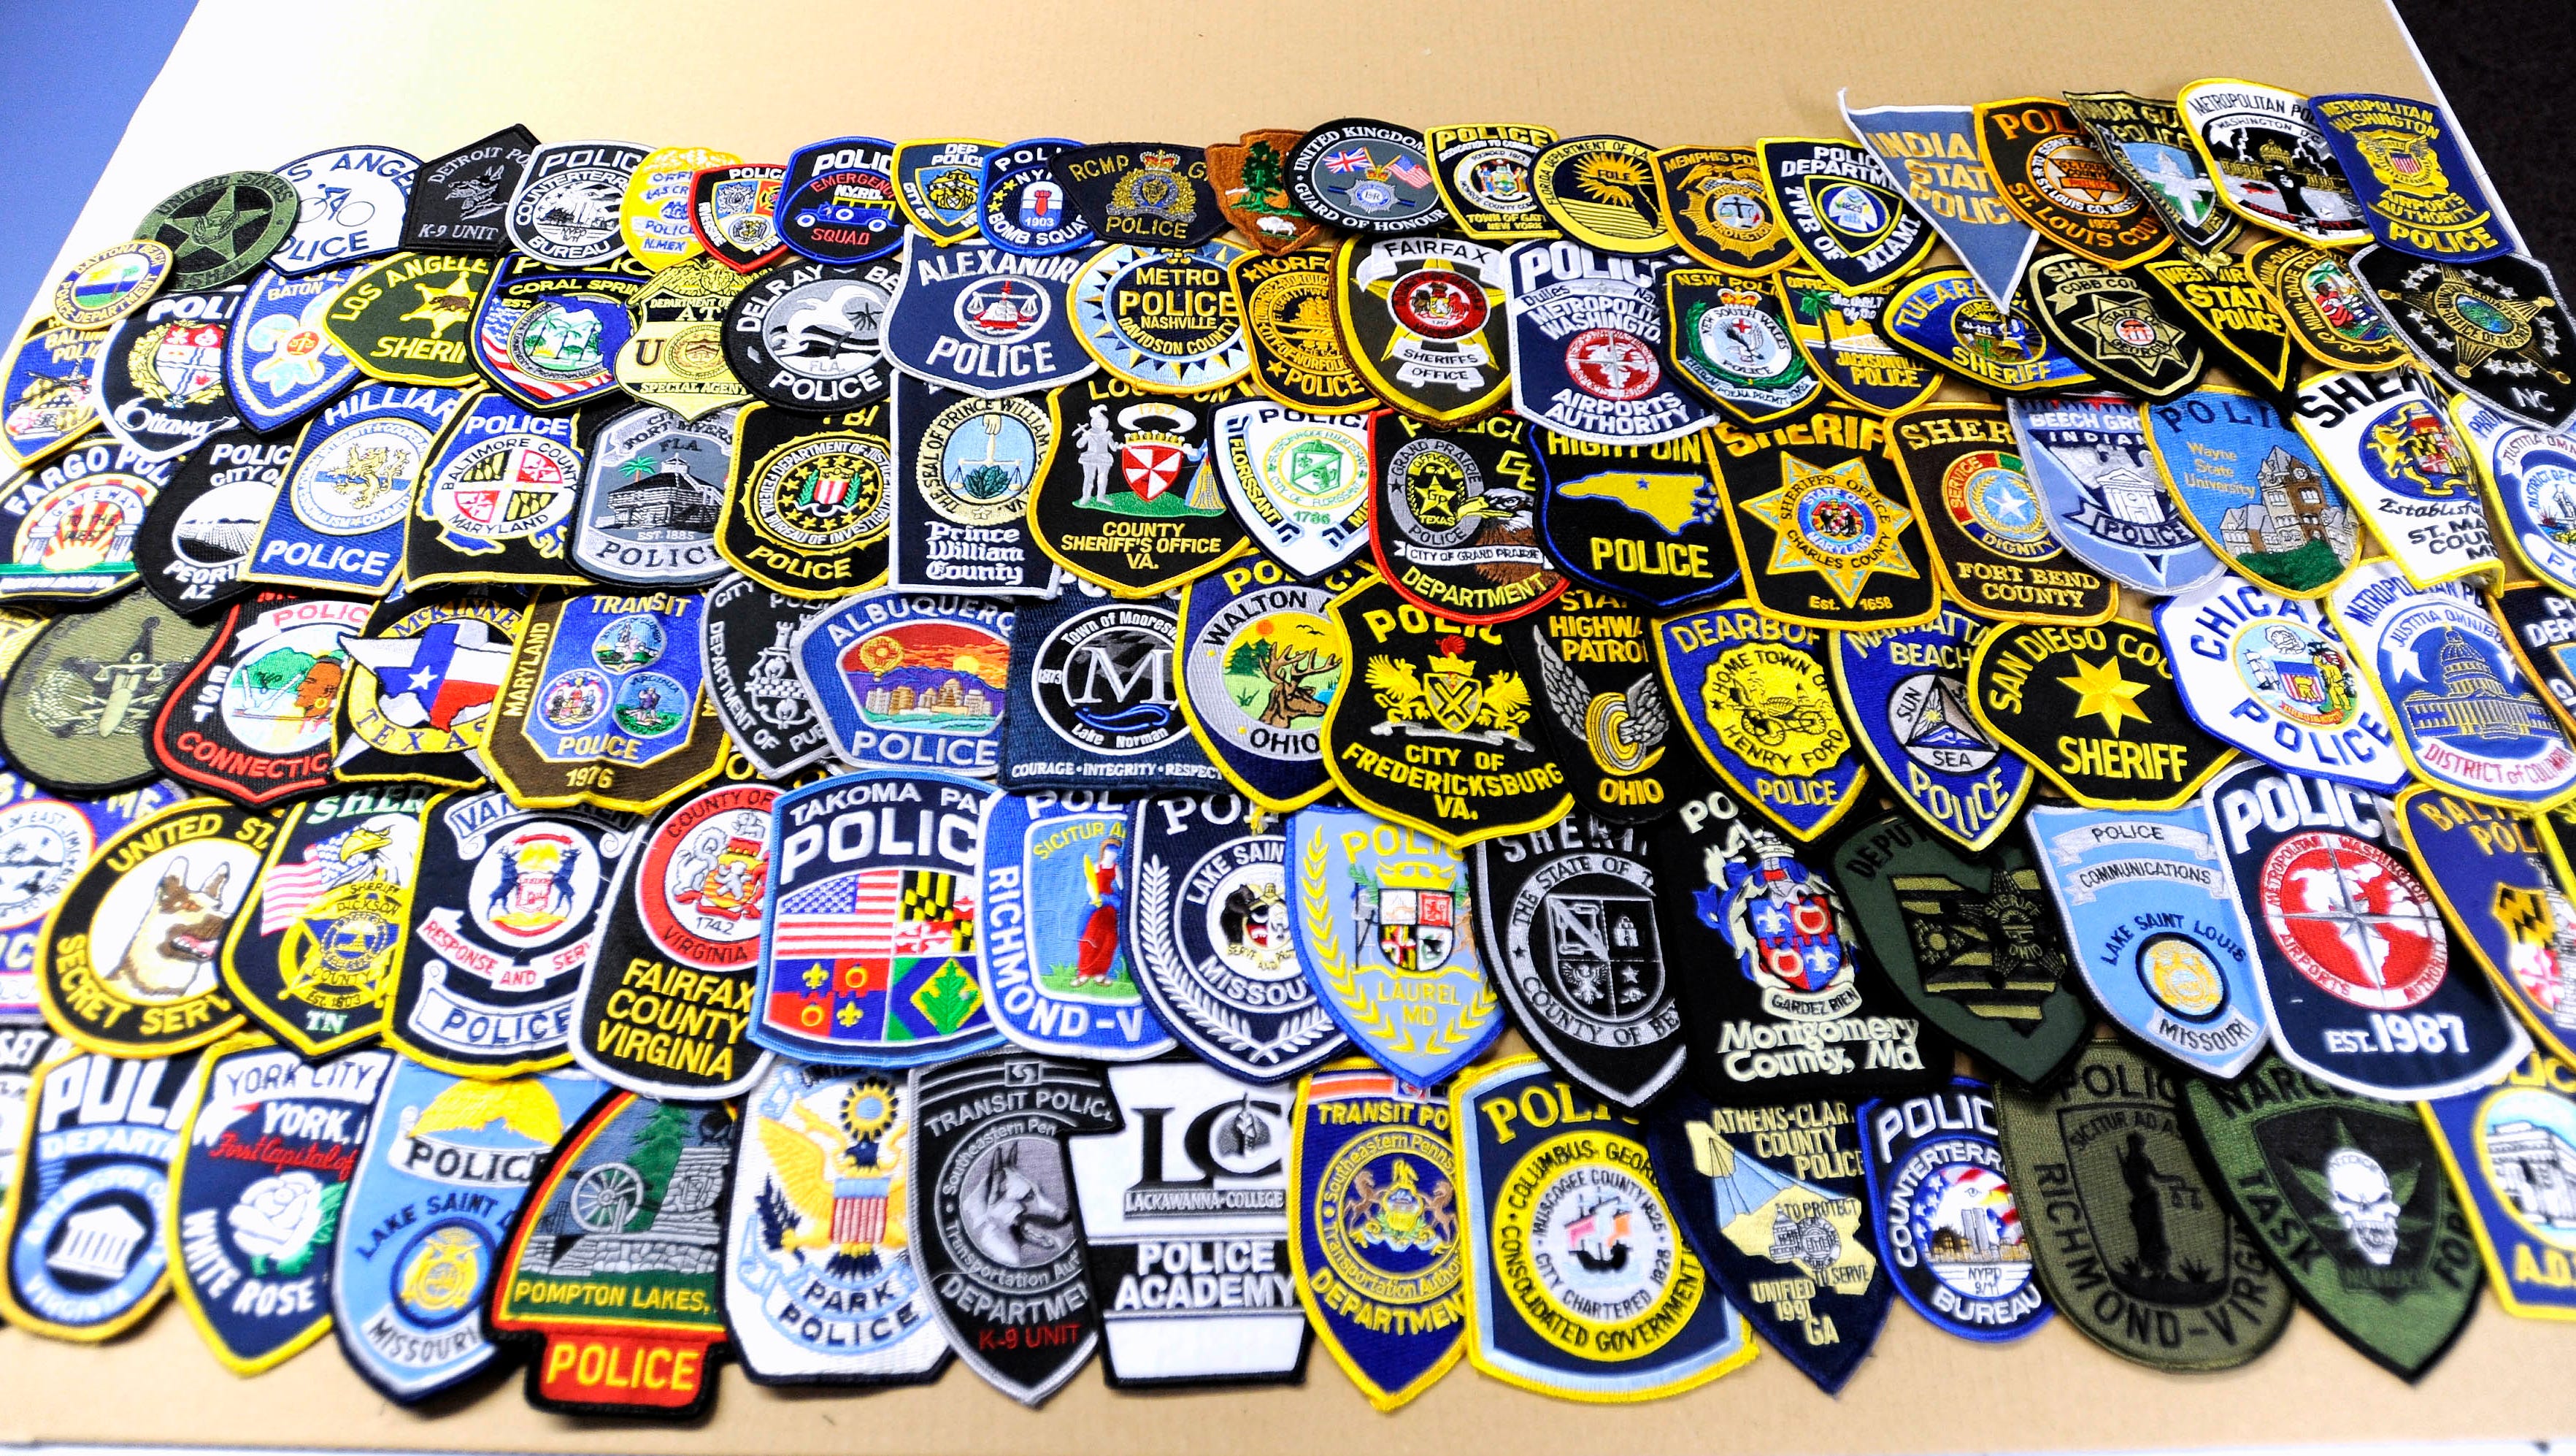 These are police shoulder patches that were given to TBL USA president and founder Andrew Jacob and vice president Pete Forhan by officers from the U.S. and Europe during their visit to Washington, D.C. for National Police Week earlier this week.